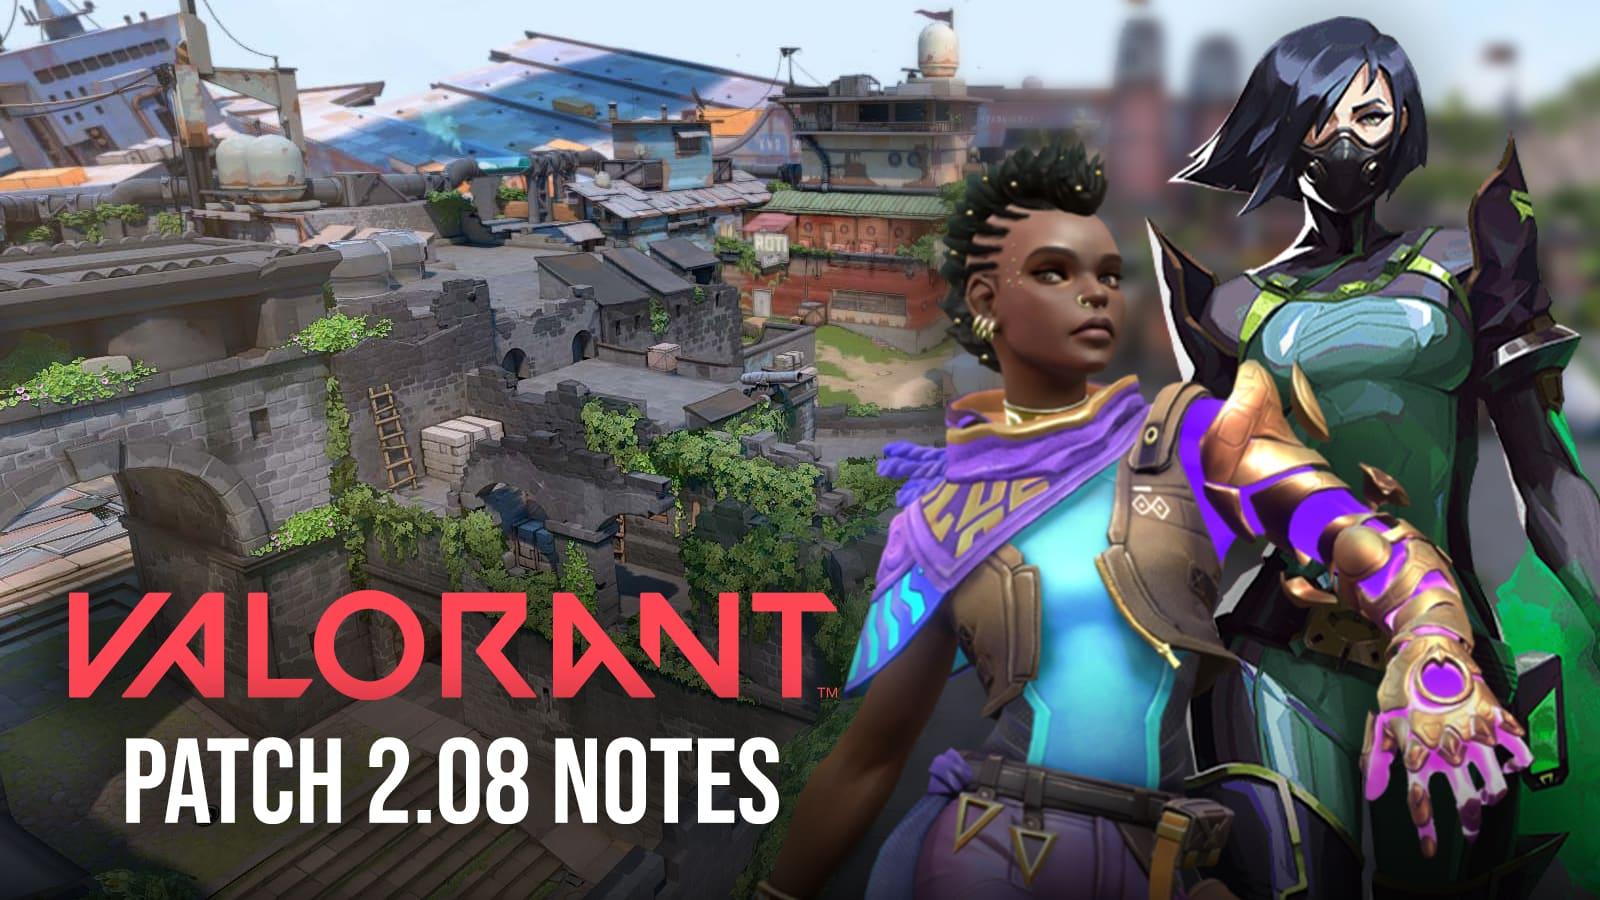 Valorant patch 2.08 notes on Breeze map with Astra & Viper